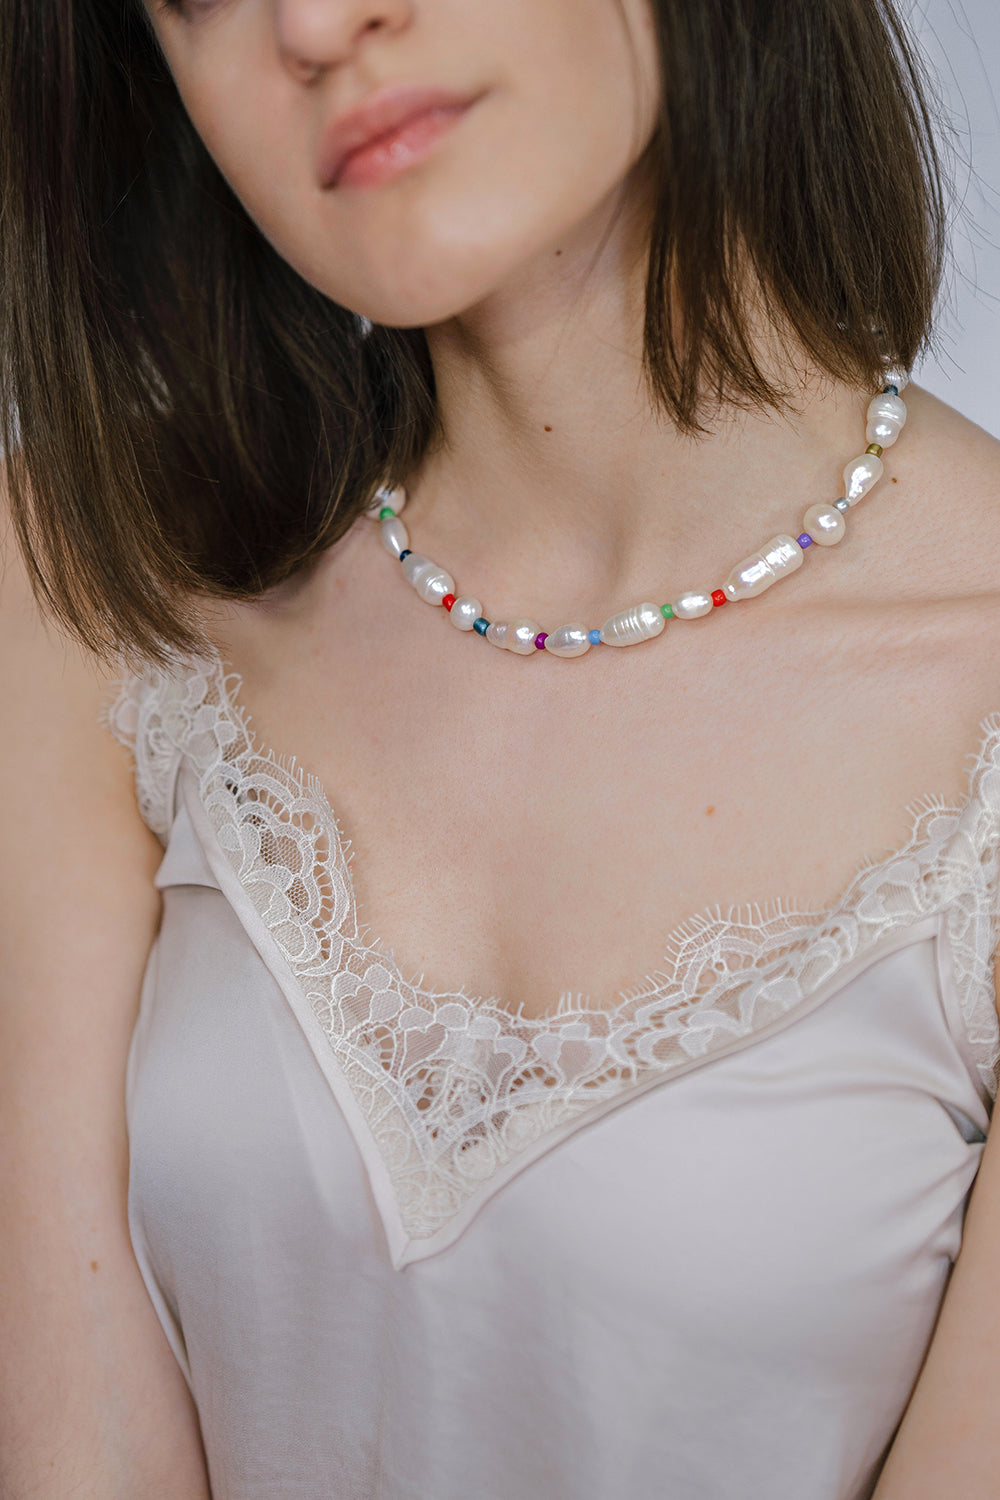  River Pearl & Colourful Beads Necklace